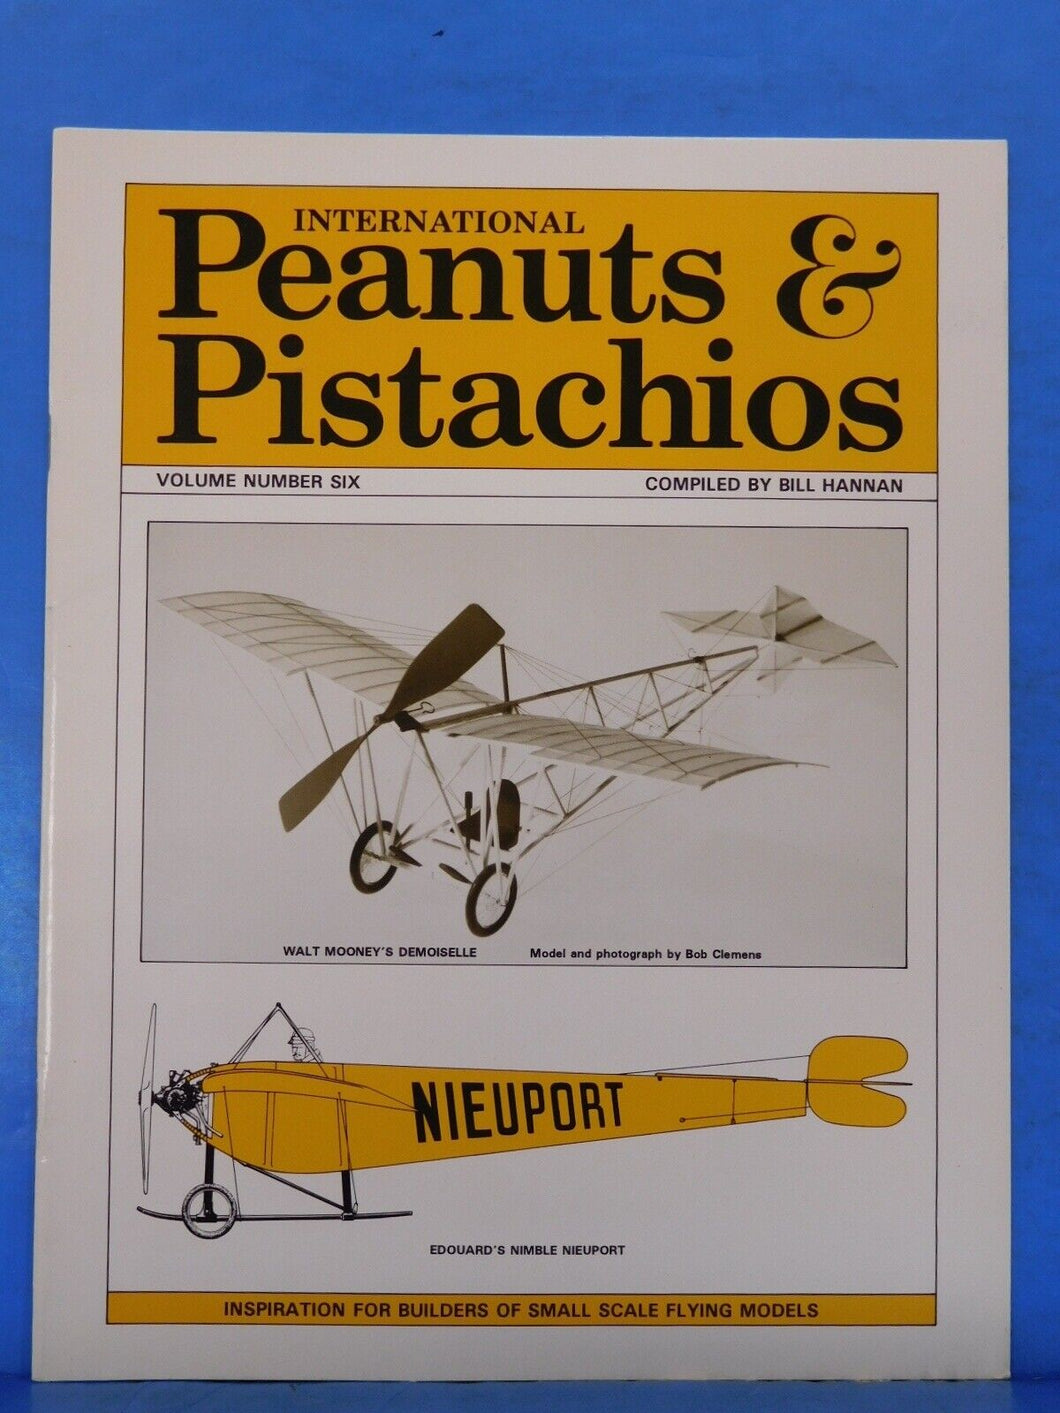 International Peanuts & Pistachios Vol #6  Inspiration small scale Flying models